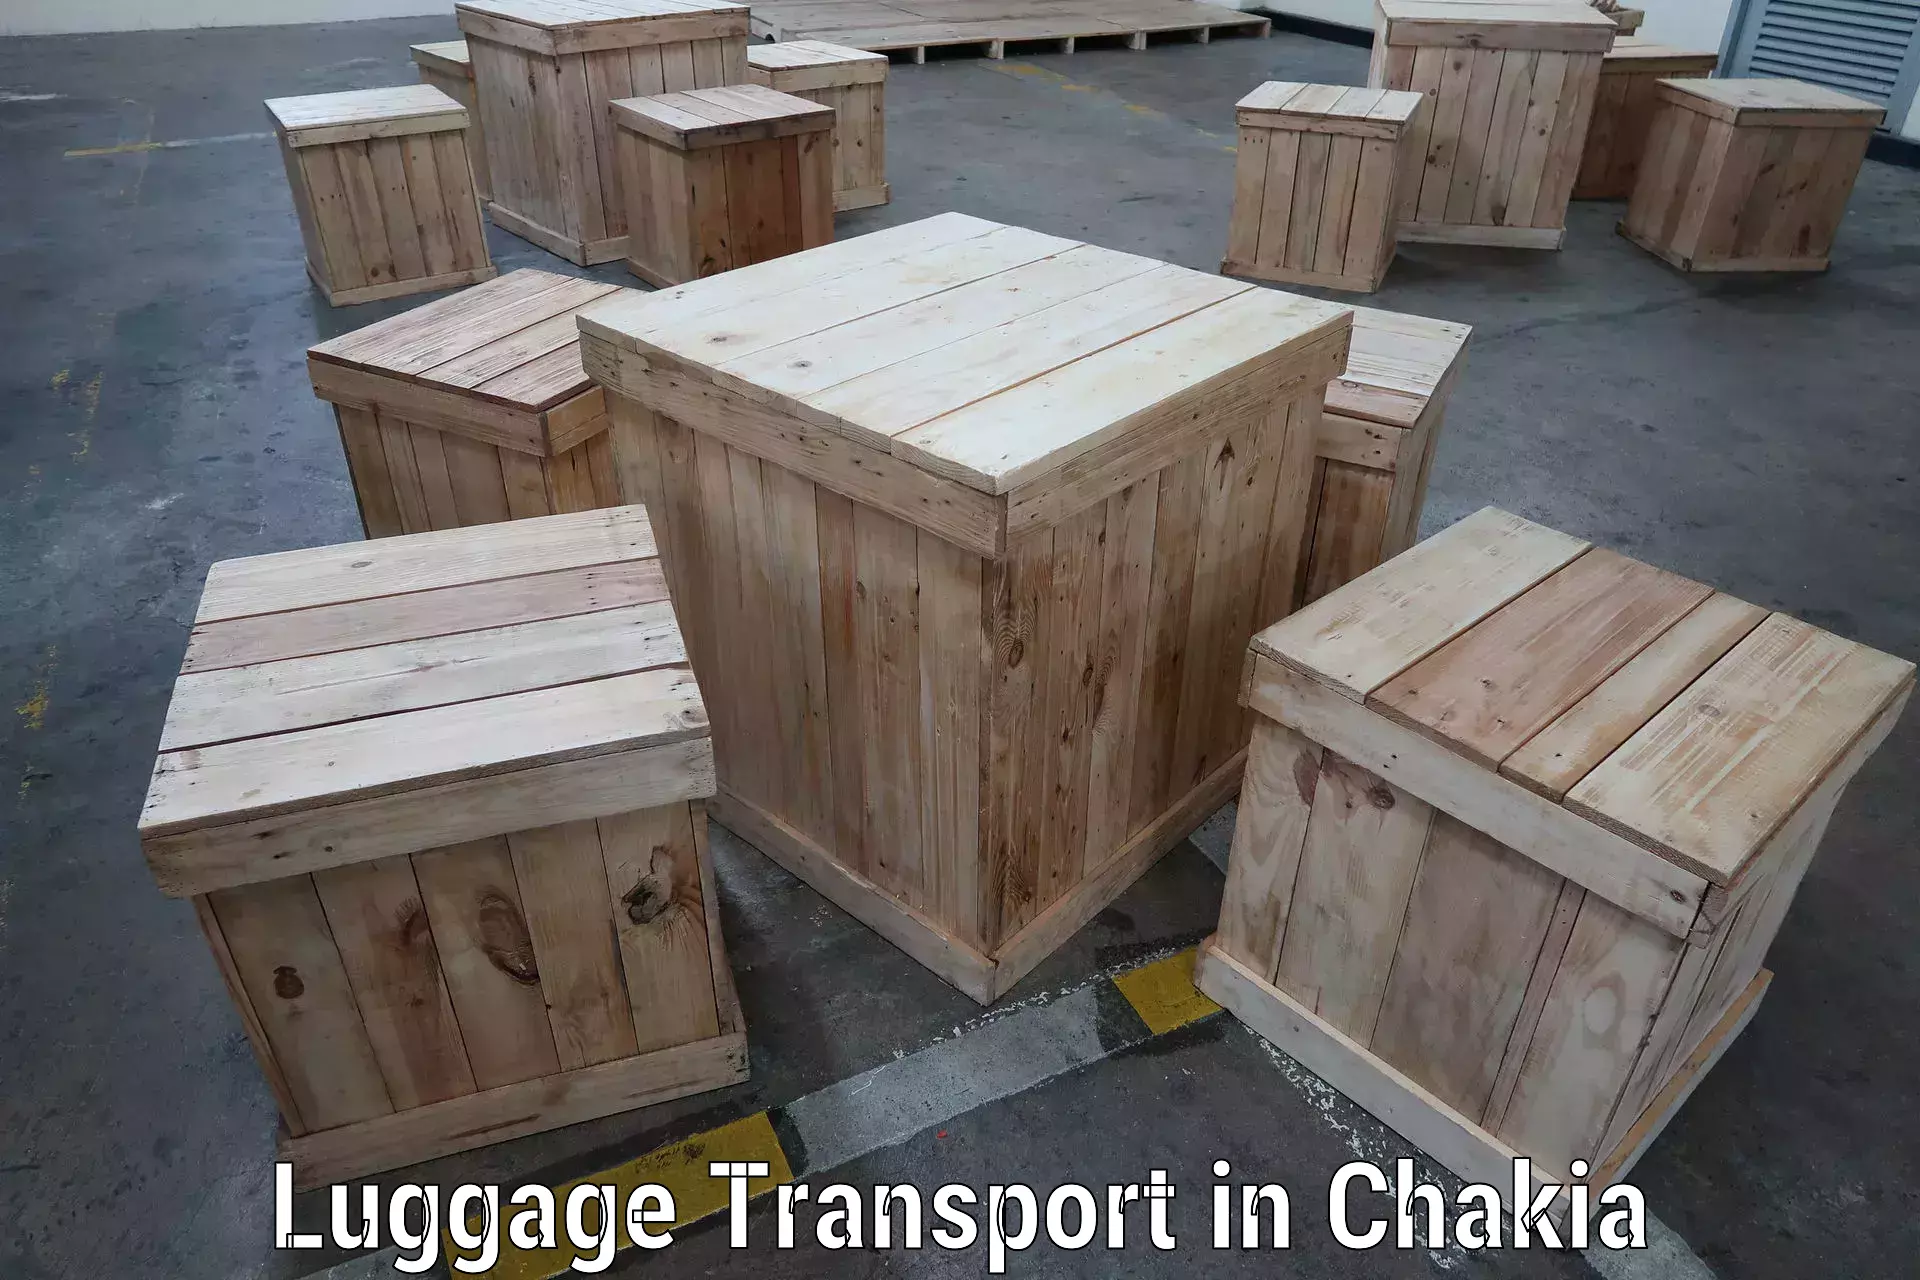 Discounted baggage transport in Chakia